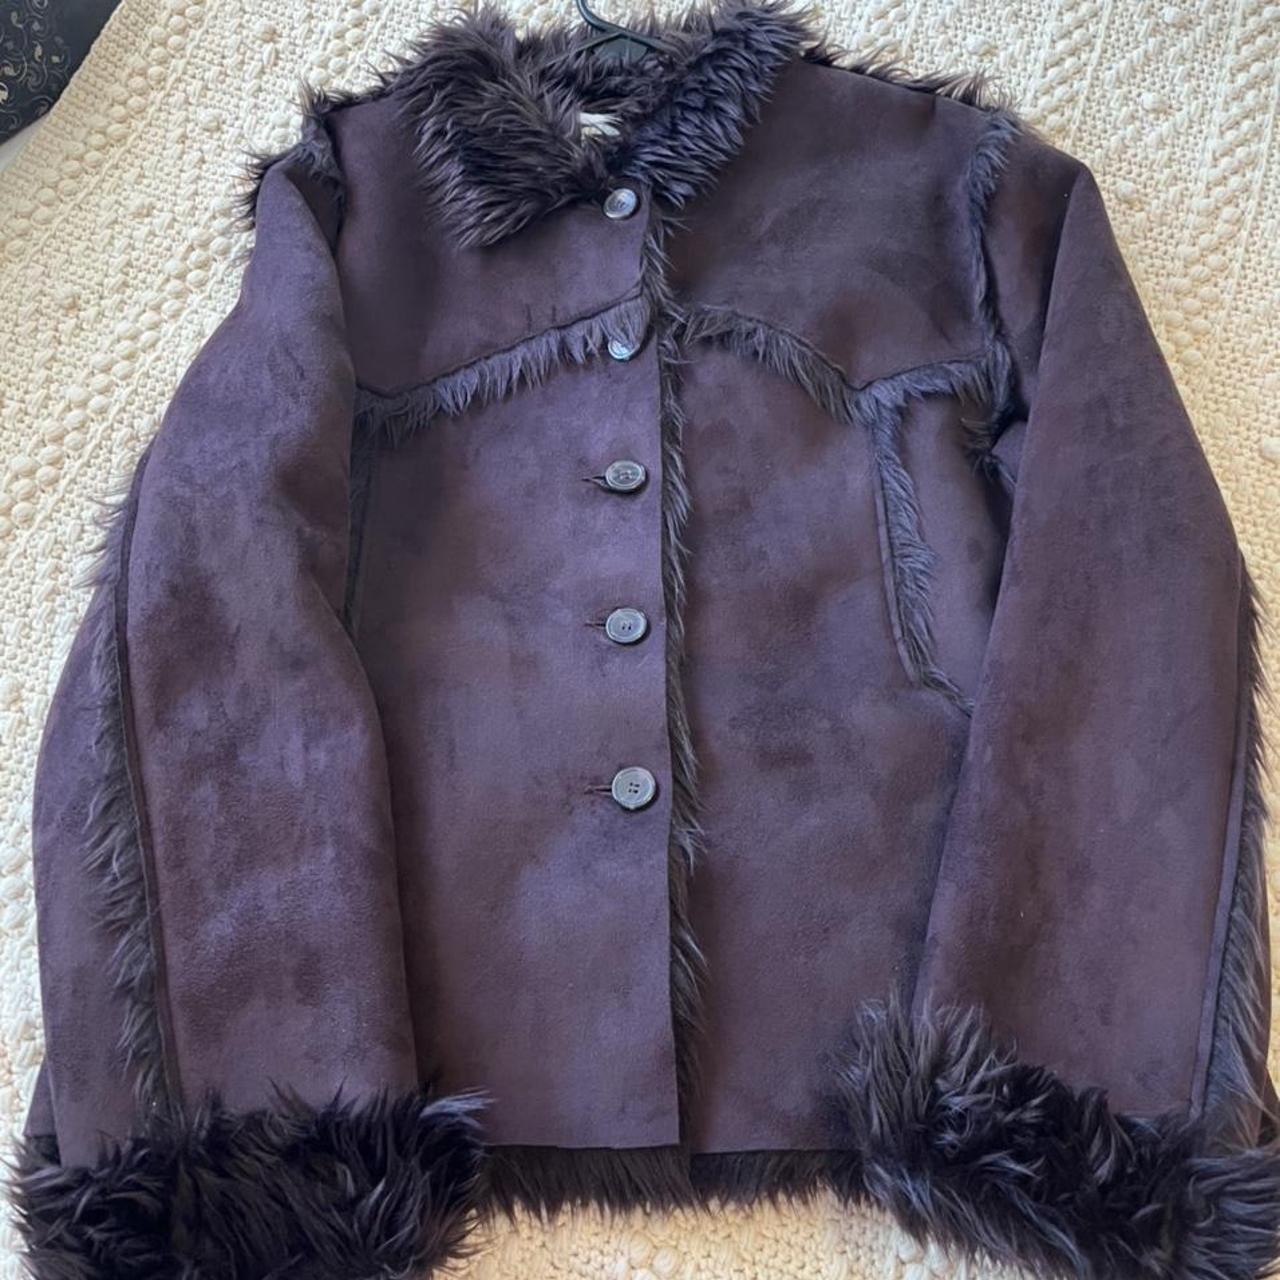 Vintage Belldini coat in great condition and perfect... - Depop